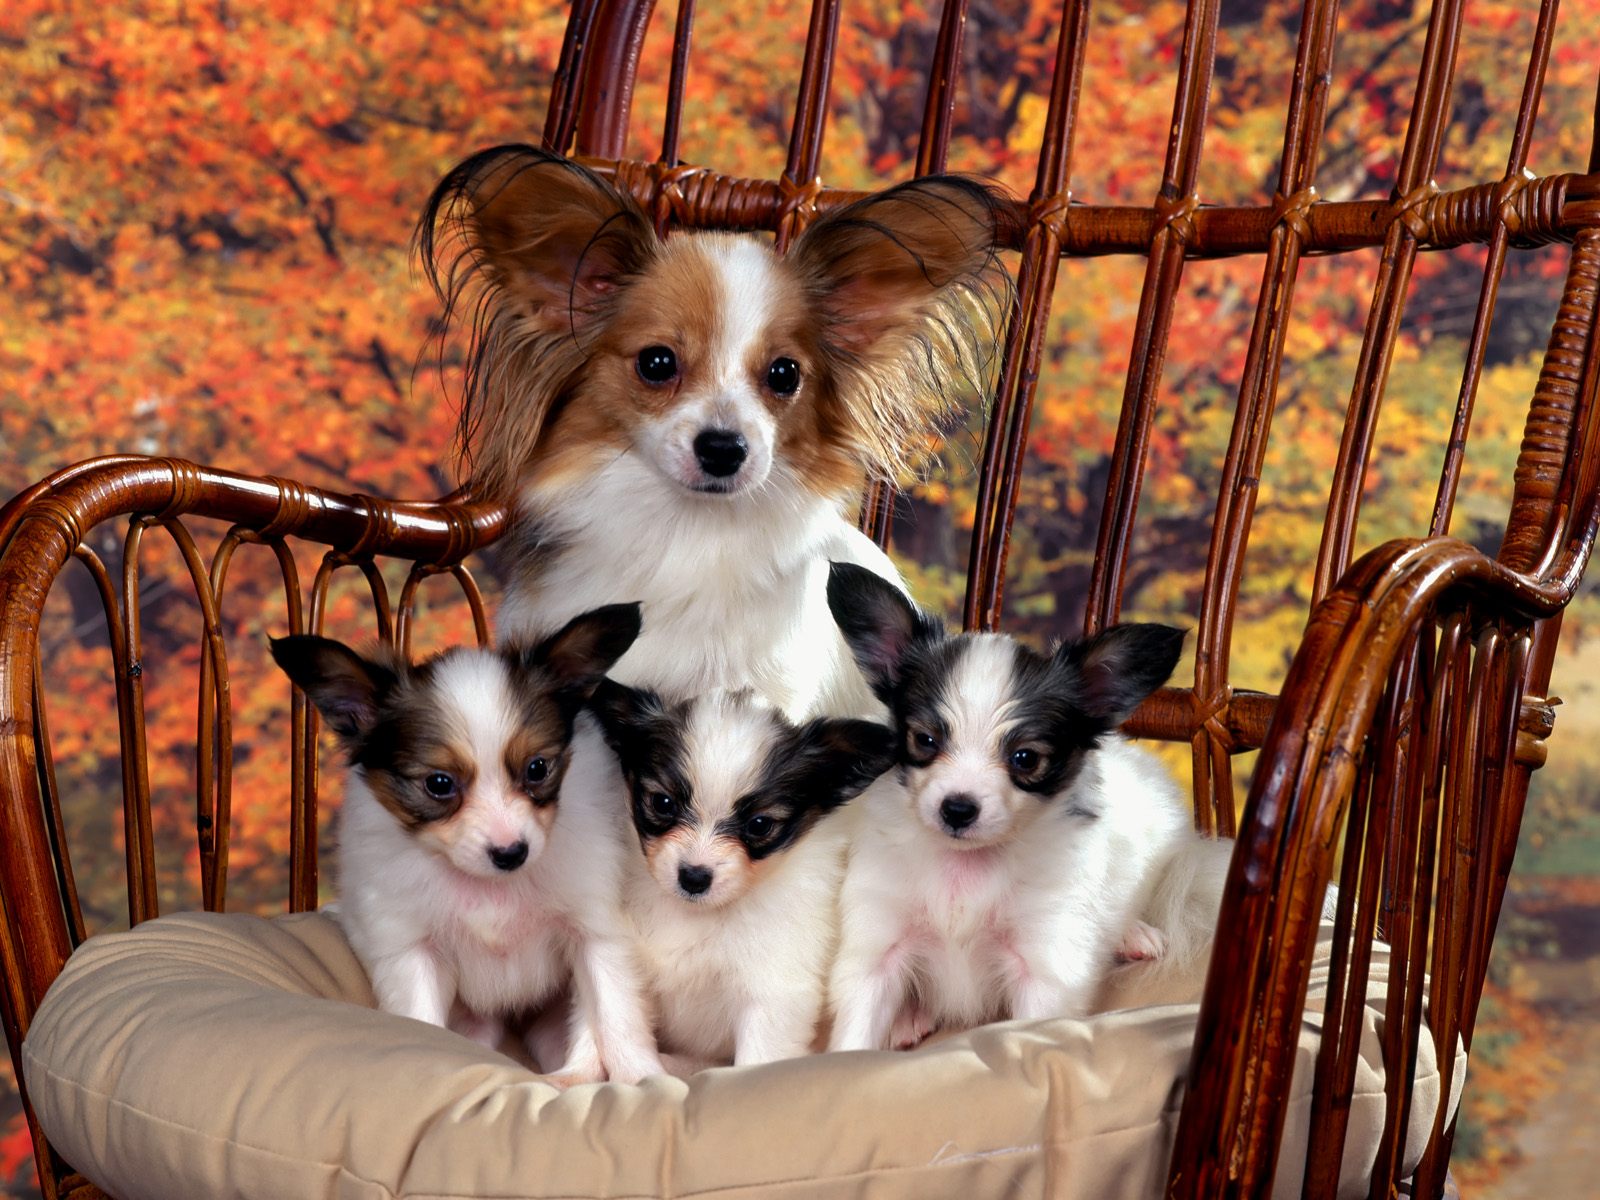 Wallpaper Gallery Animals Chihuahua Dog And Puppies